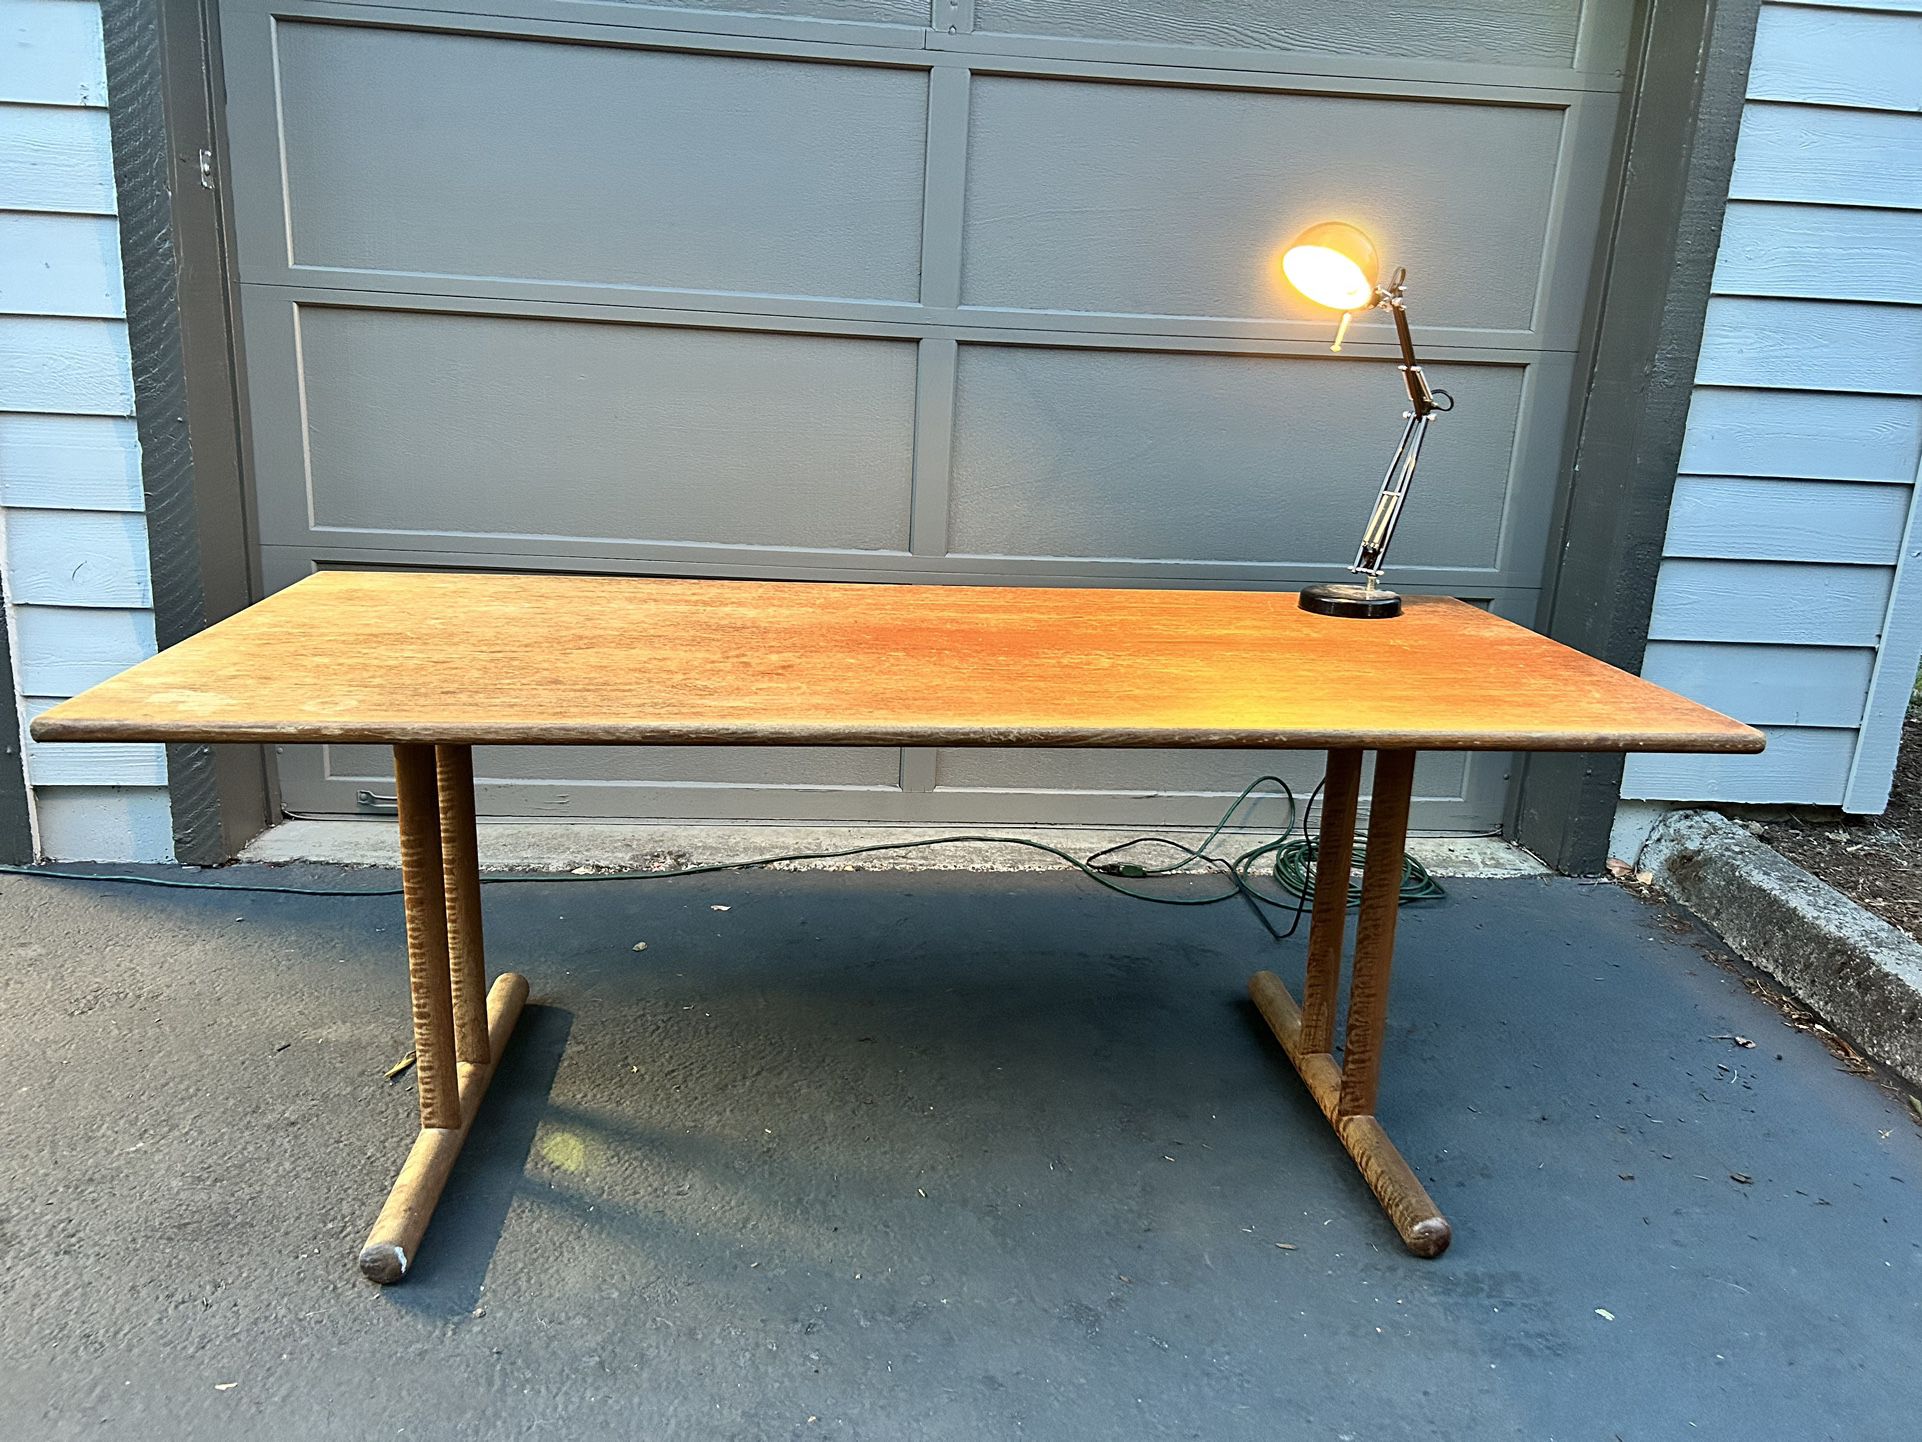 Desk/table/craft table